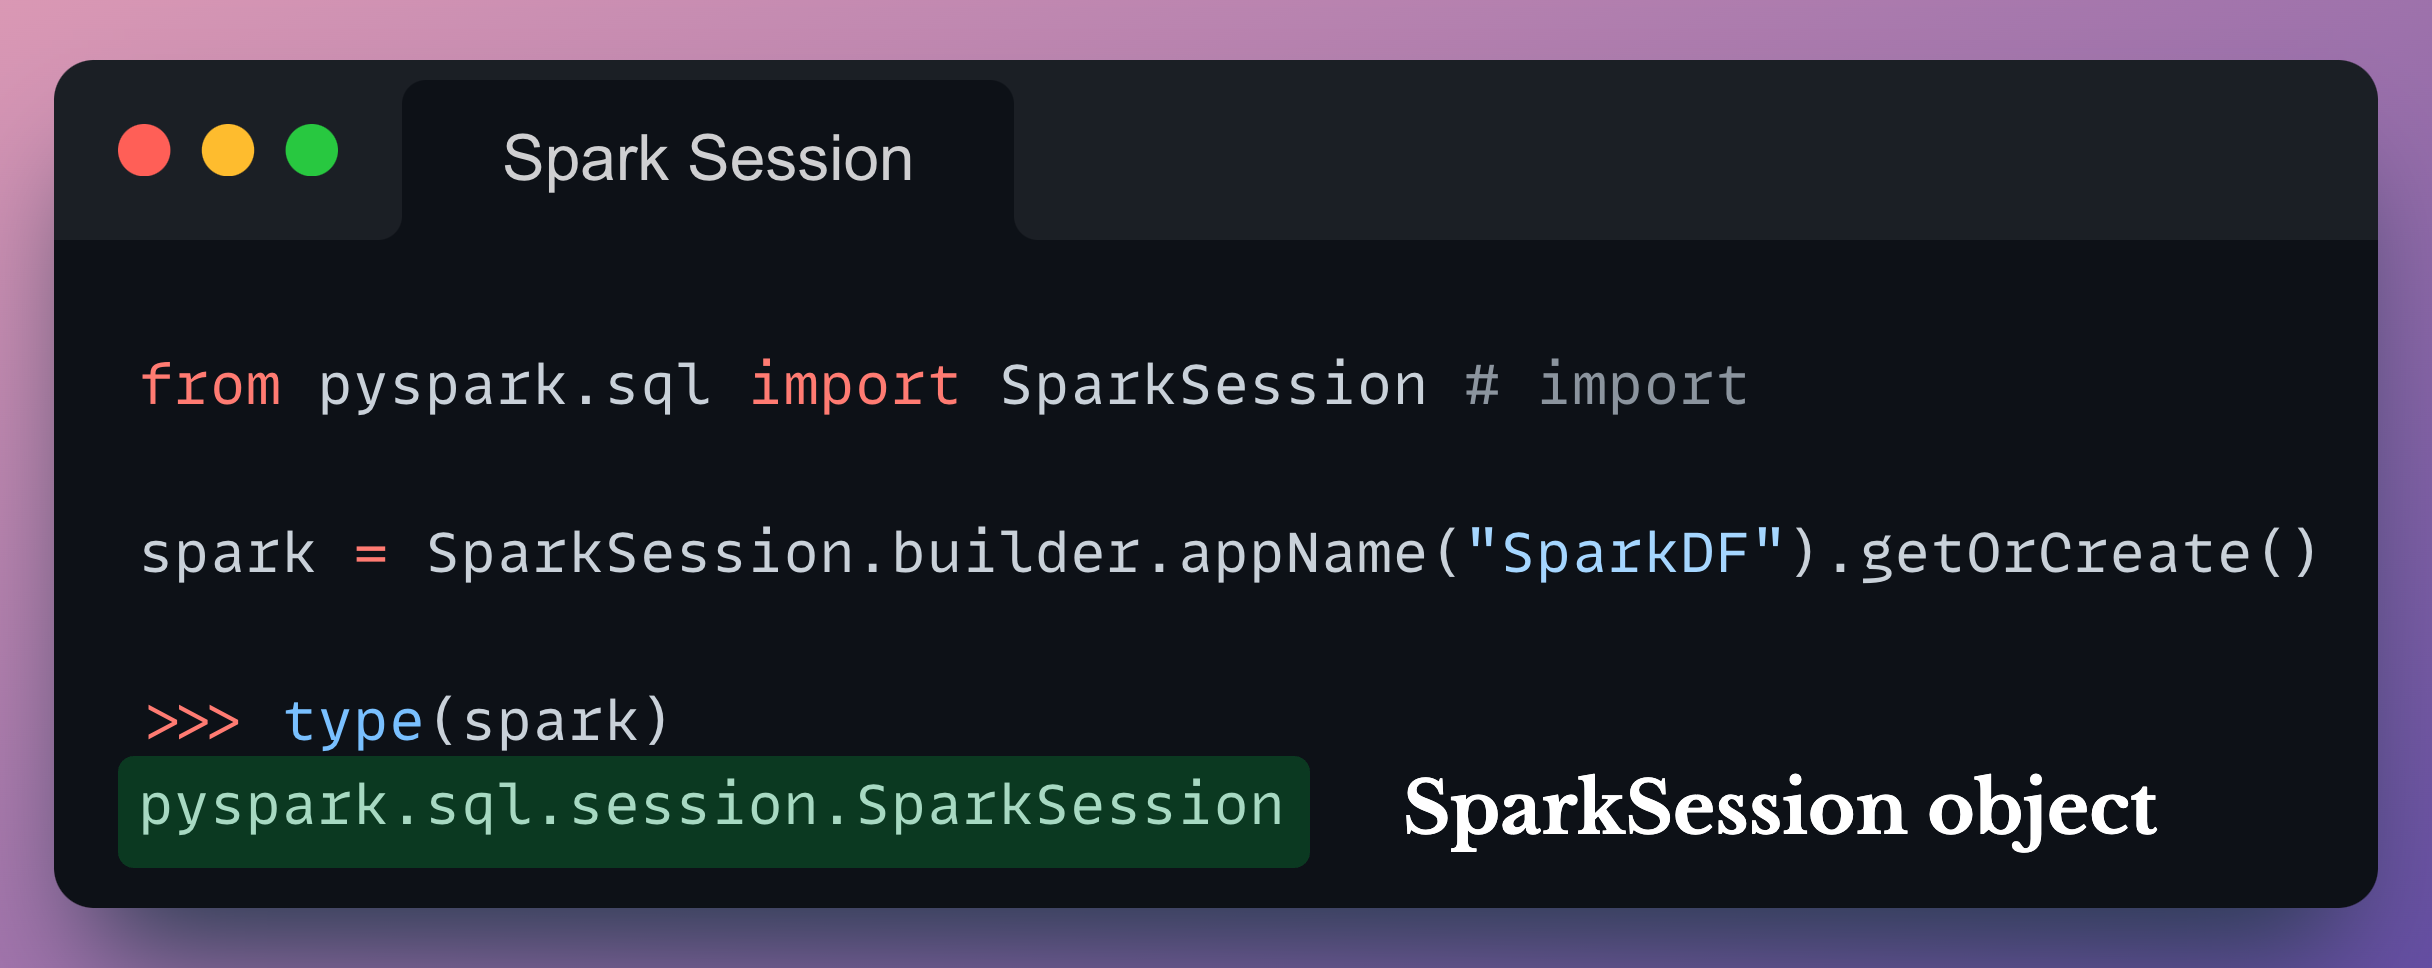 Don't Stop at Pandas and Sklearn! Get Started with Spark DataFrames and Big Data ML using PySpark